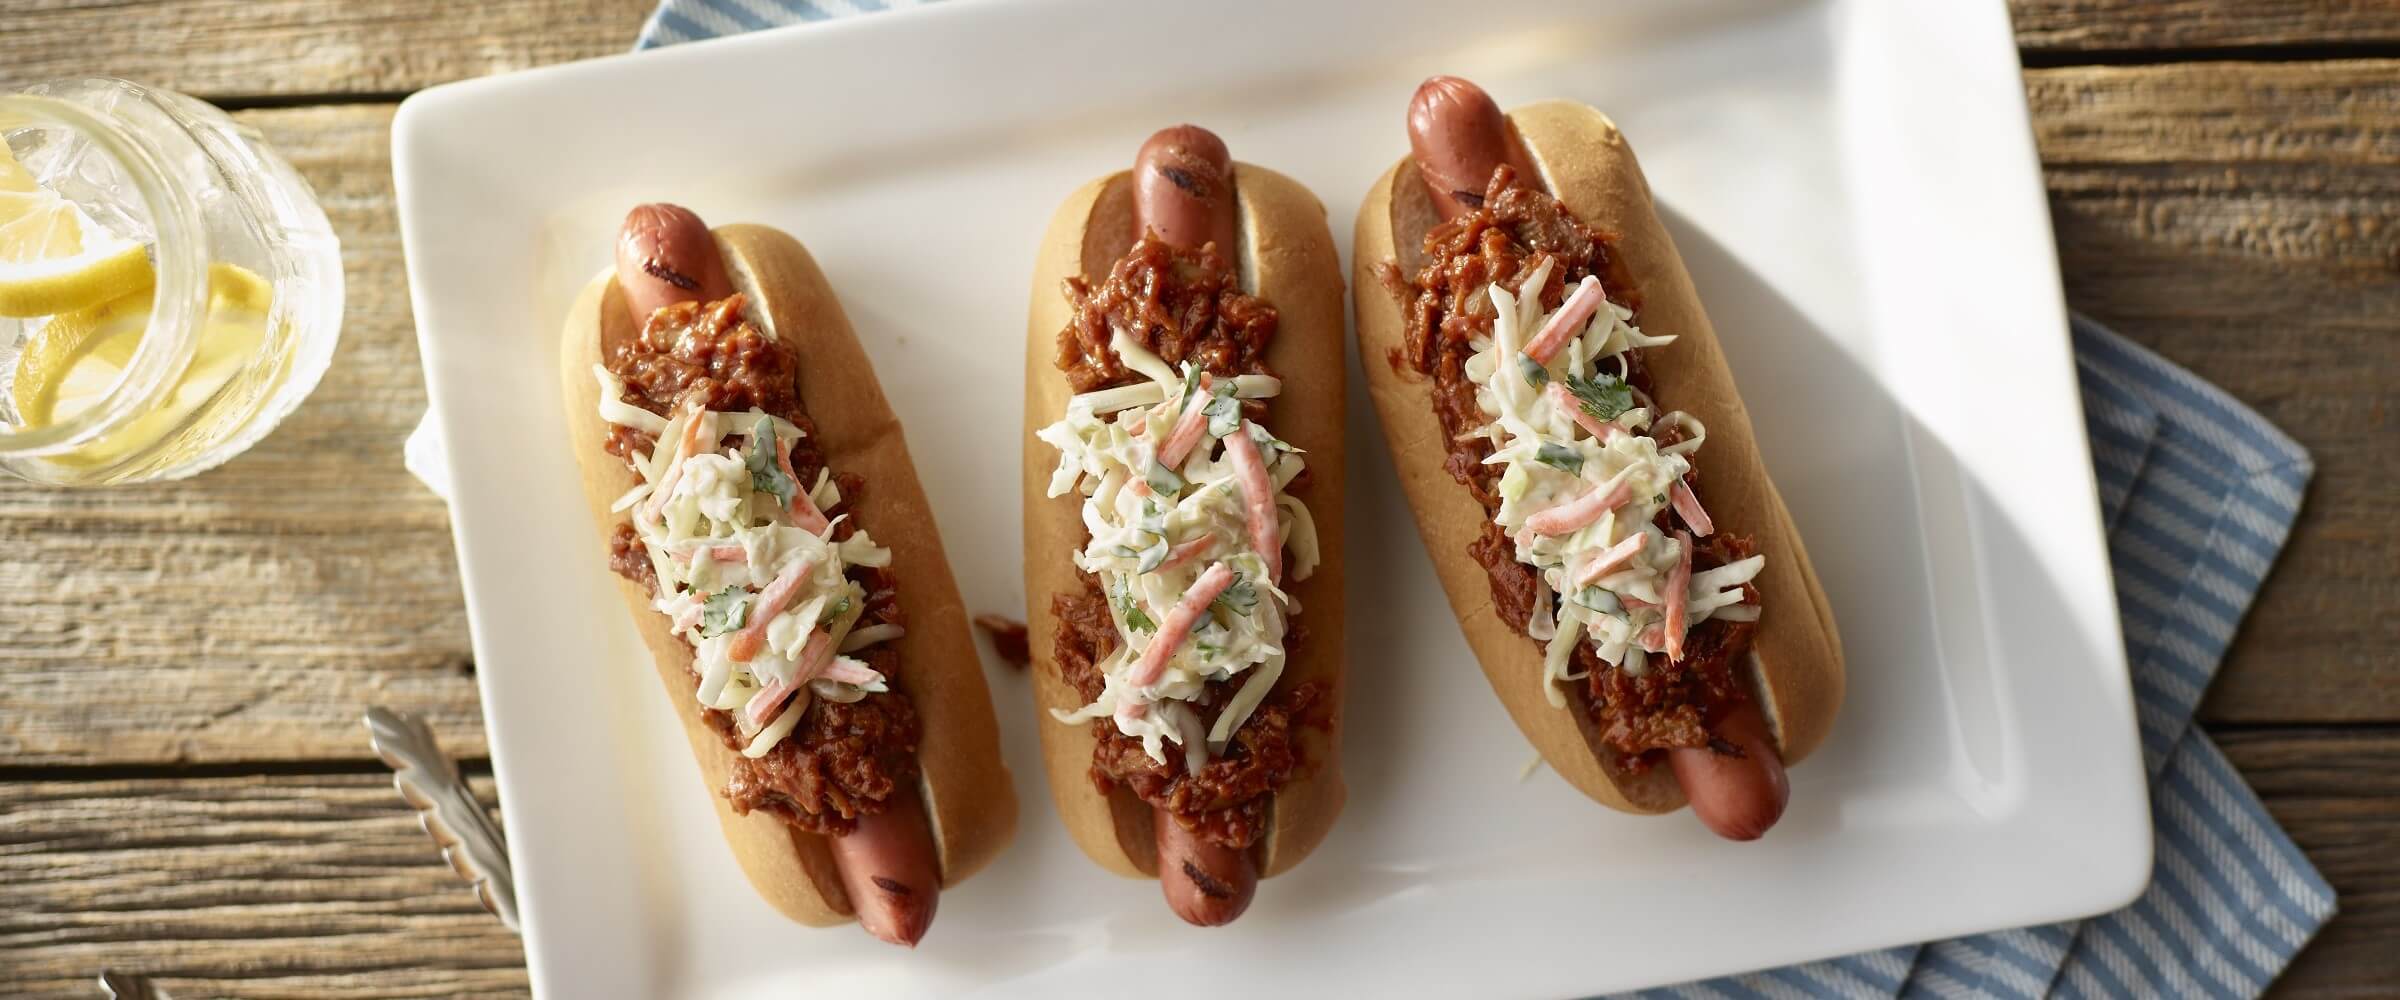 BBQ beef slaw dogs on white plate with striped napkin